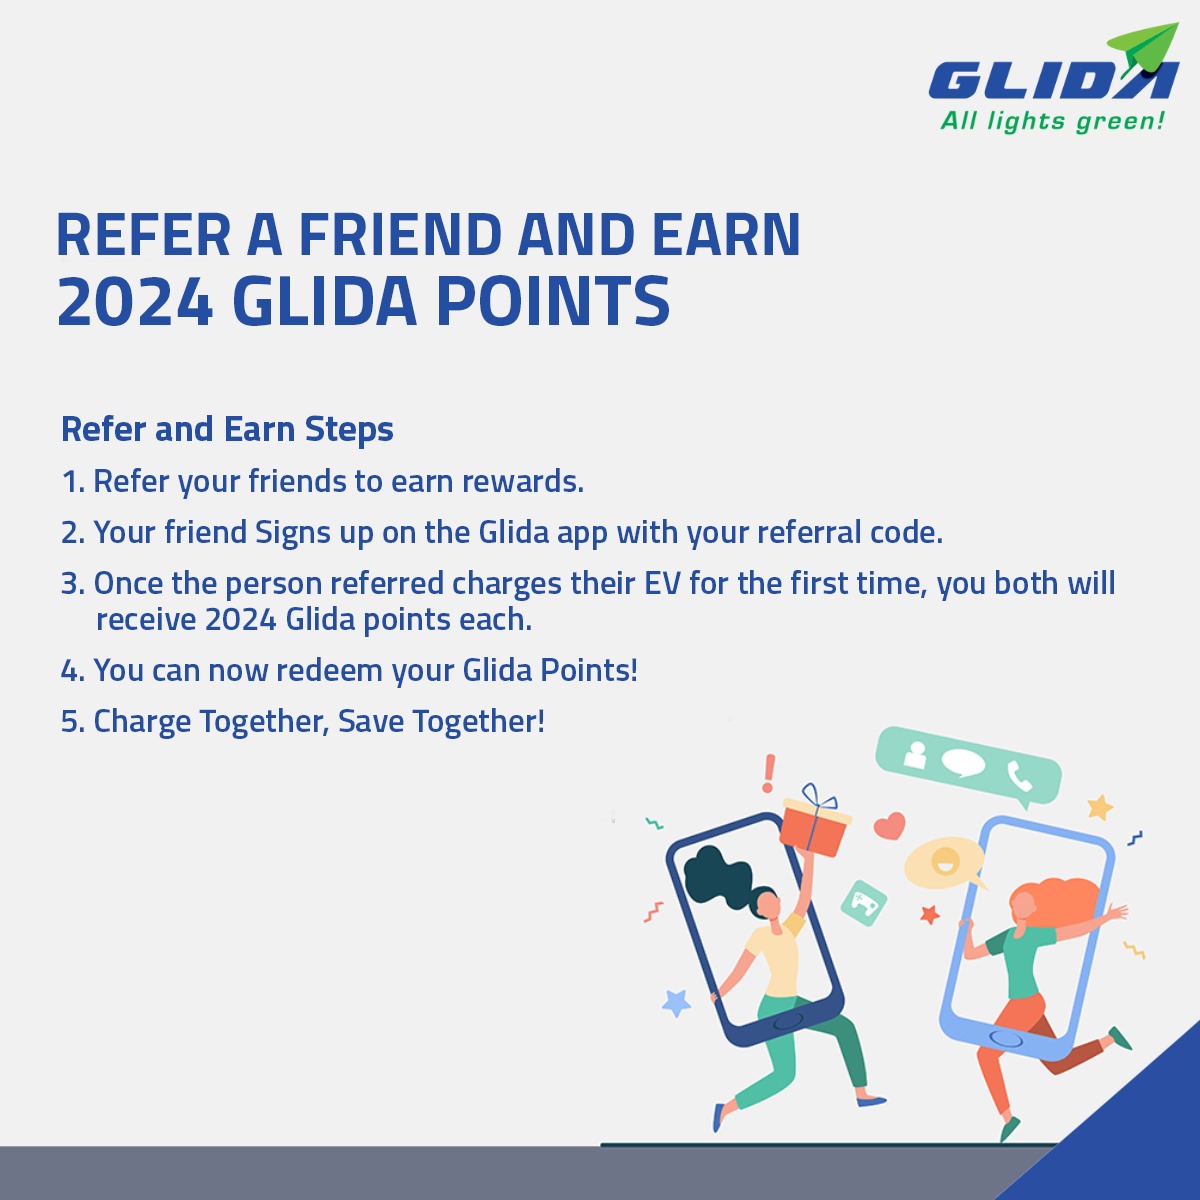 What's NEW - Launching GLIDA’s Referral Program - Refer a Friend & Earn 2024 #GLIDA Points ✨✨ 🎉🎉 Don't miss out on this opportunity to earn rewards & be part of our journey towards creating even more value for you. 🎉🎉 Refer a friend today! #AllLightsGreen #referralprogram